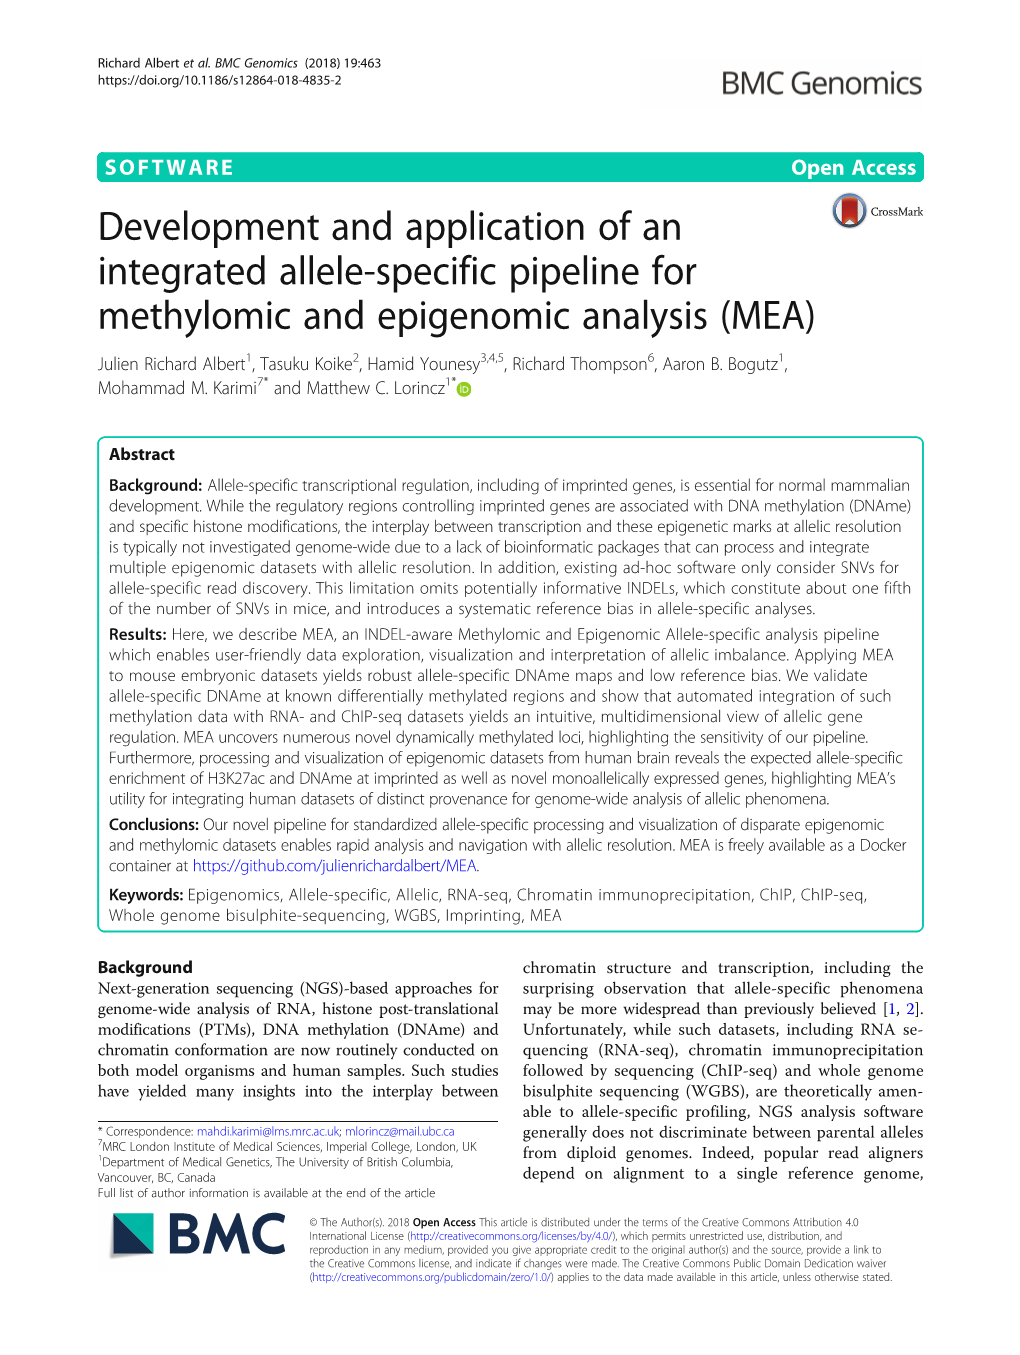 Development and Application of an Integrated Allele-Specific Pipeline